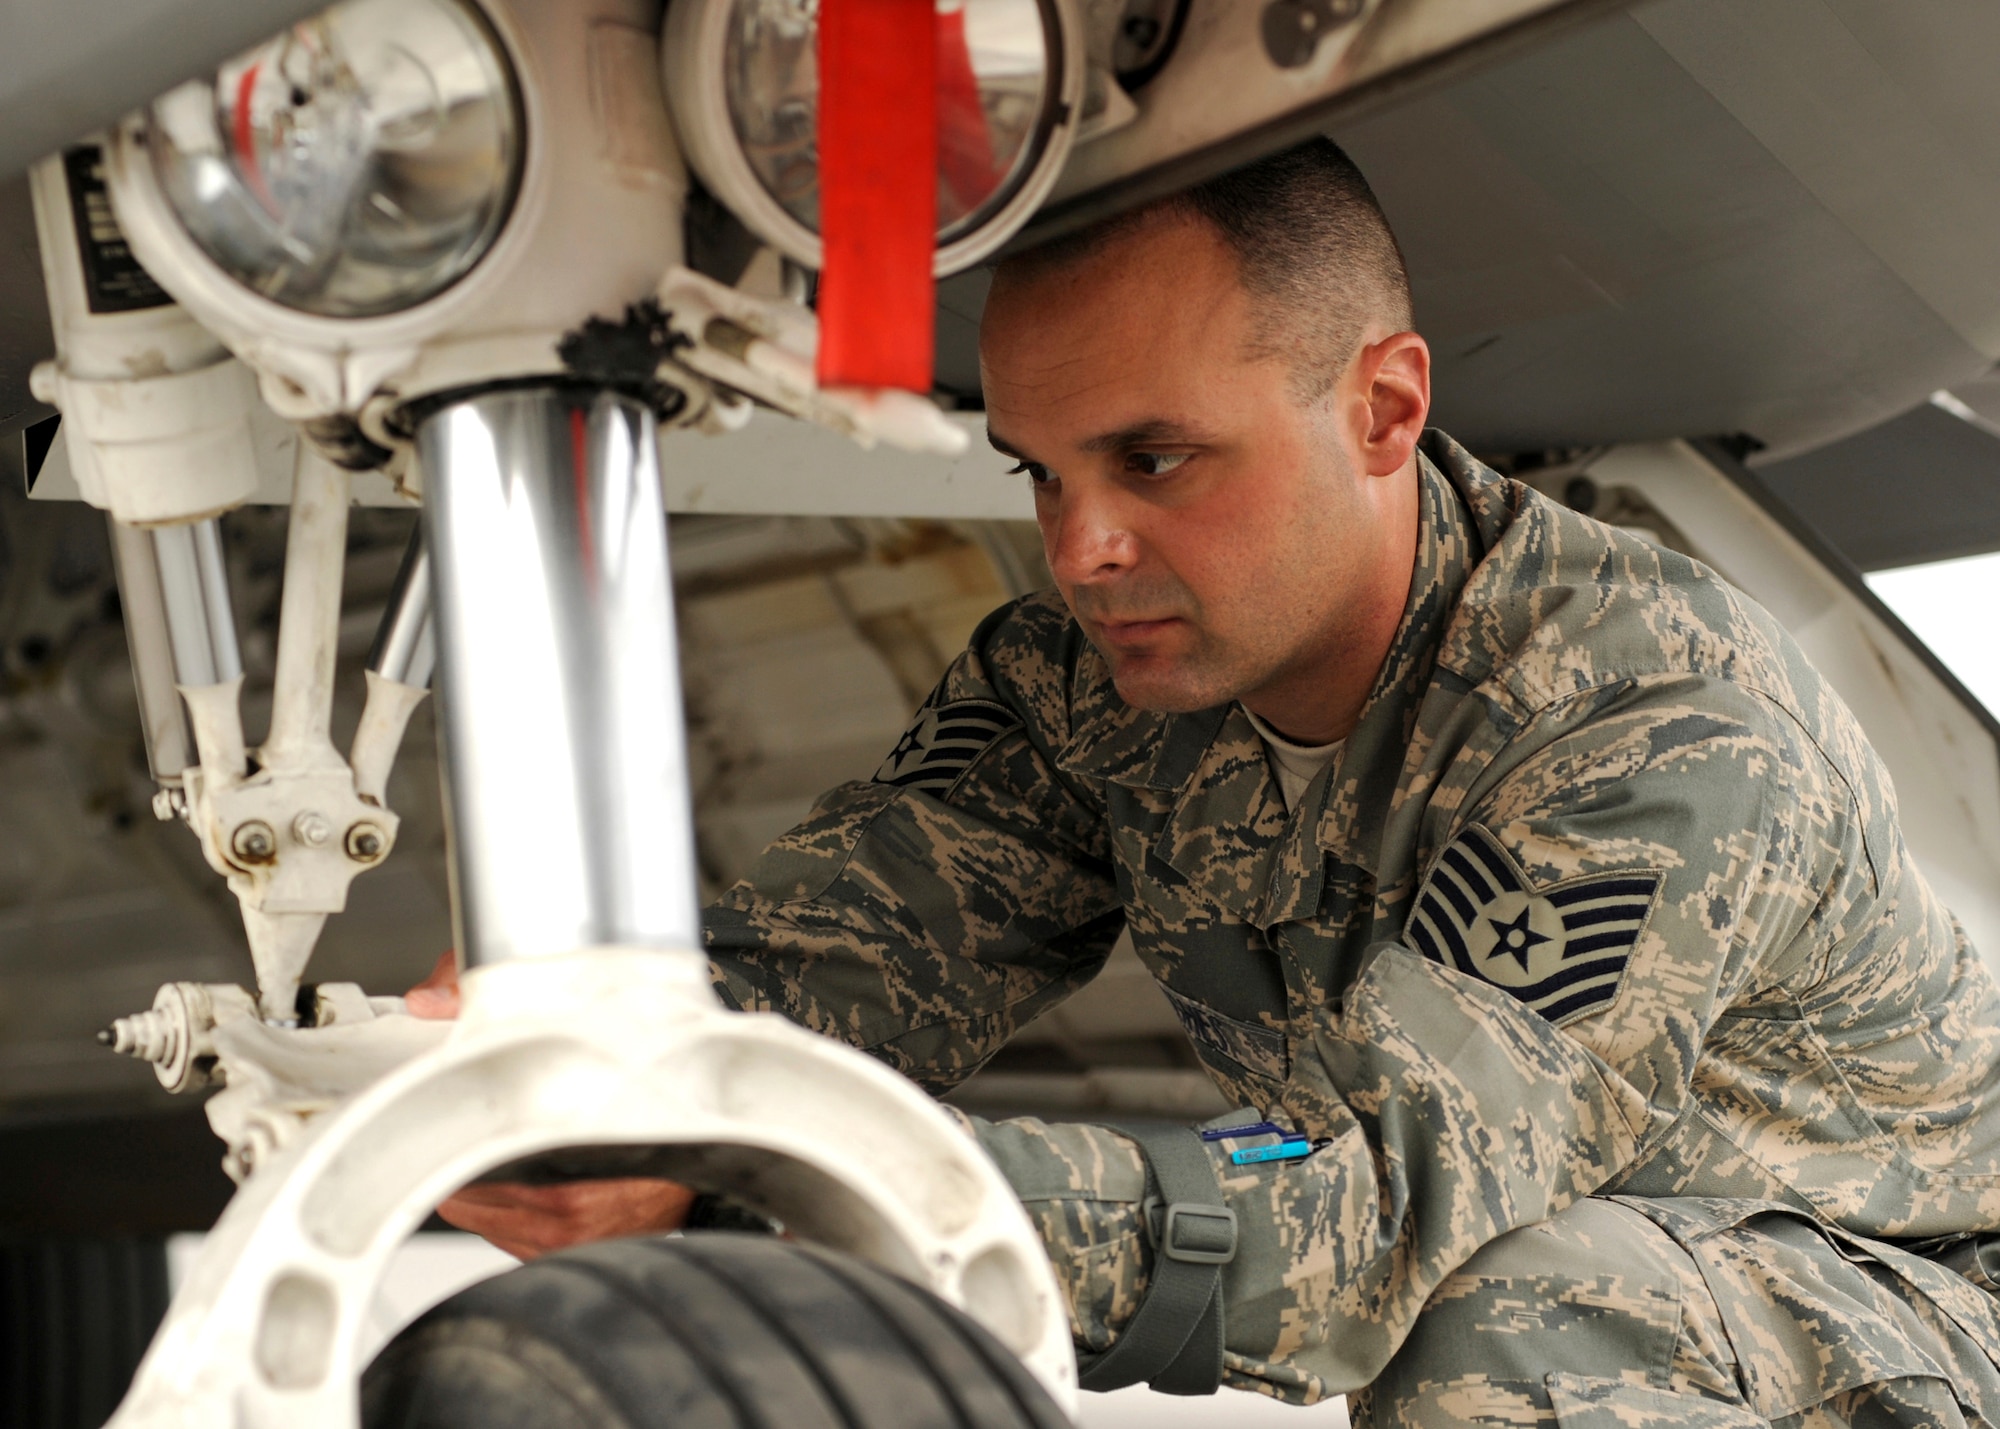 ELMENDORF AIR FORCE BASE, Alaska -- Tech. Sgt. Jason Hughes, 3rd Aircraft Maintenance Squadron, inspects an F-22A Raptor for any loose or missing parts during an inspection July 10. Sergeant Hughes was named as one of 12 Outstanding Airmen of the Year. (U.S. Air Force photo/Airman 1st Class Laura Turner)